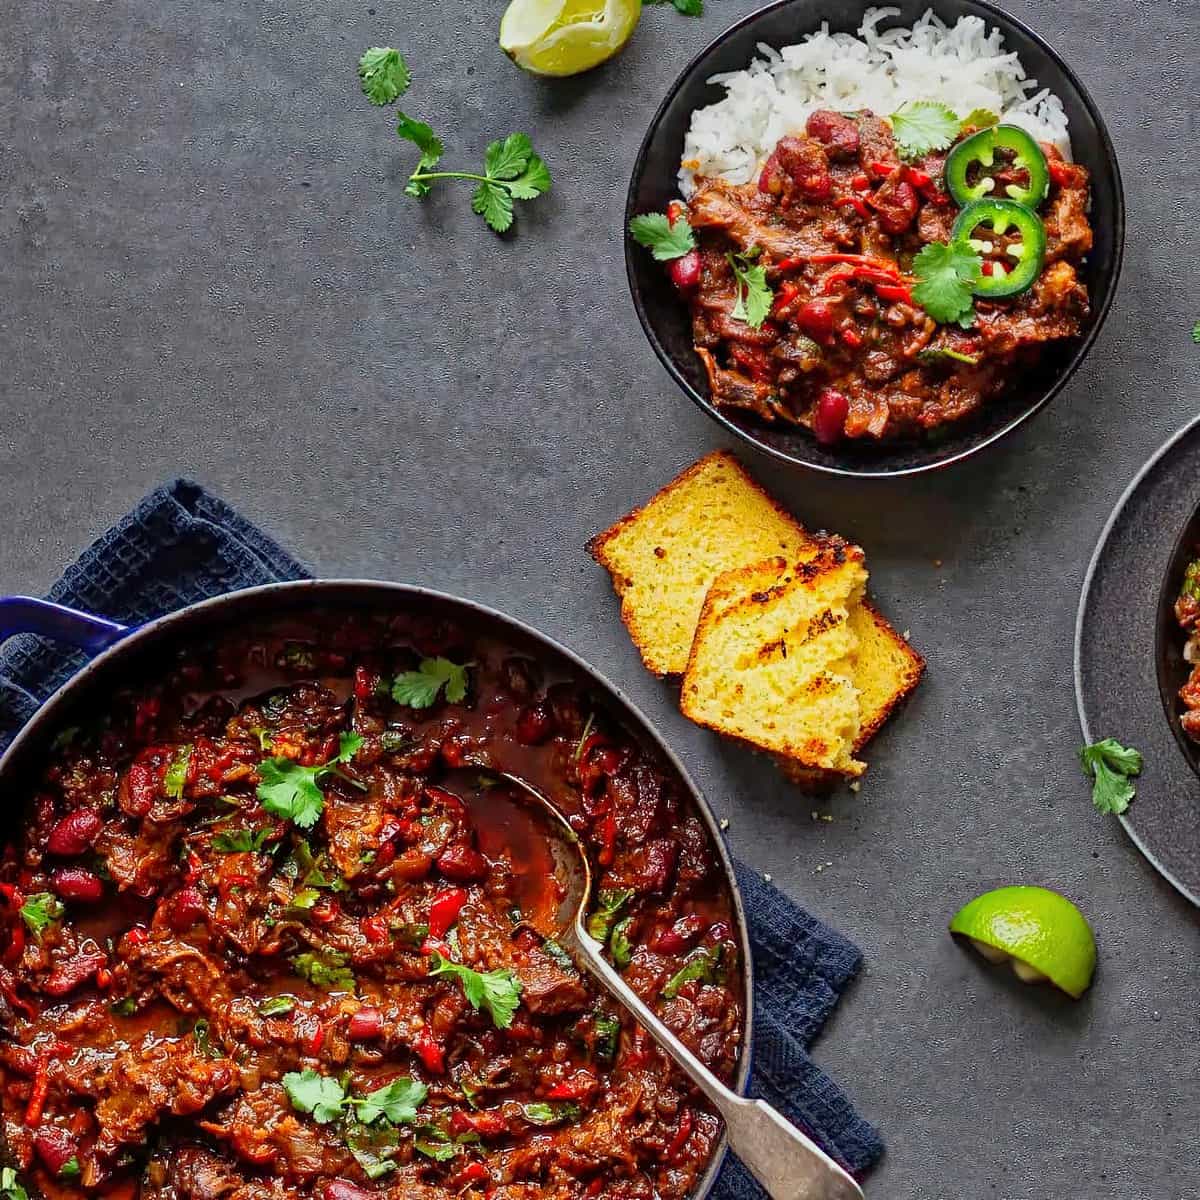 25 Best Chili Recipes - Oxtail Chili